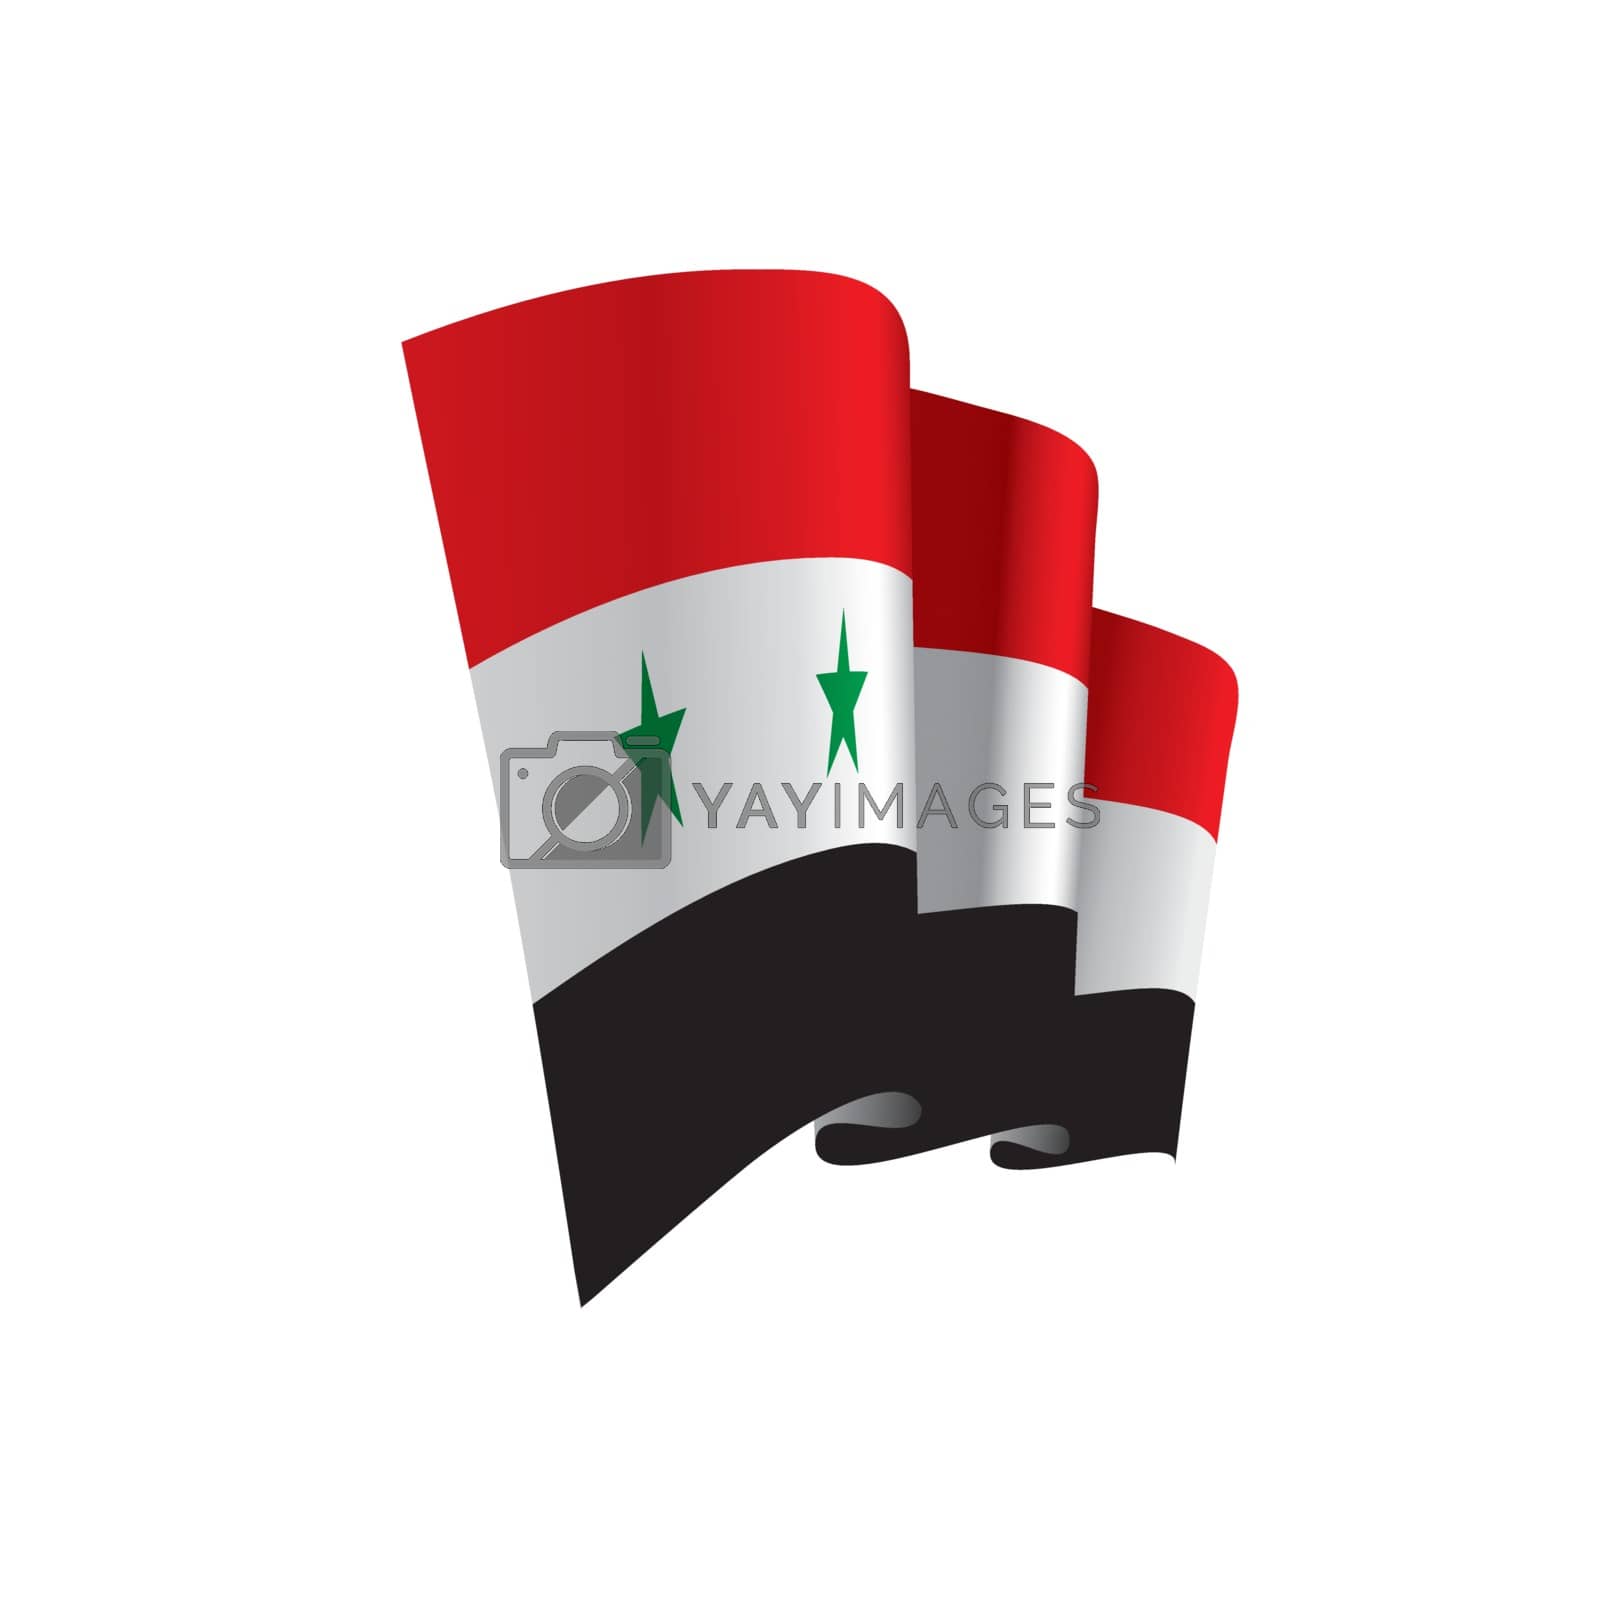 Royalty free image of Syria flag, vector illustration by butenkow